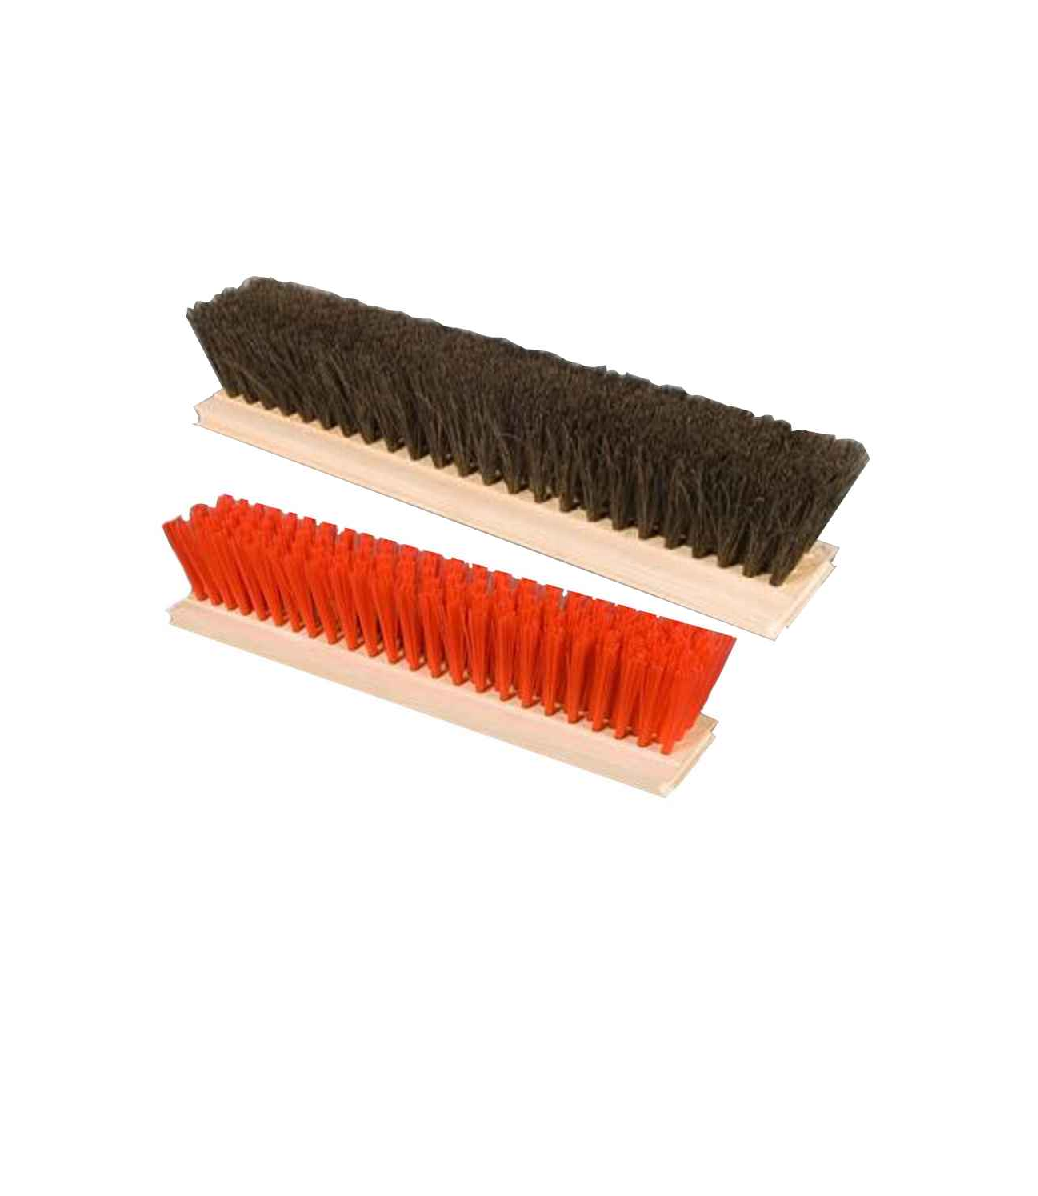 Replacement brushes 50 cm wide - Plastic red or Arenga